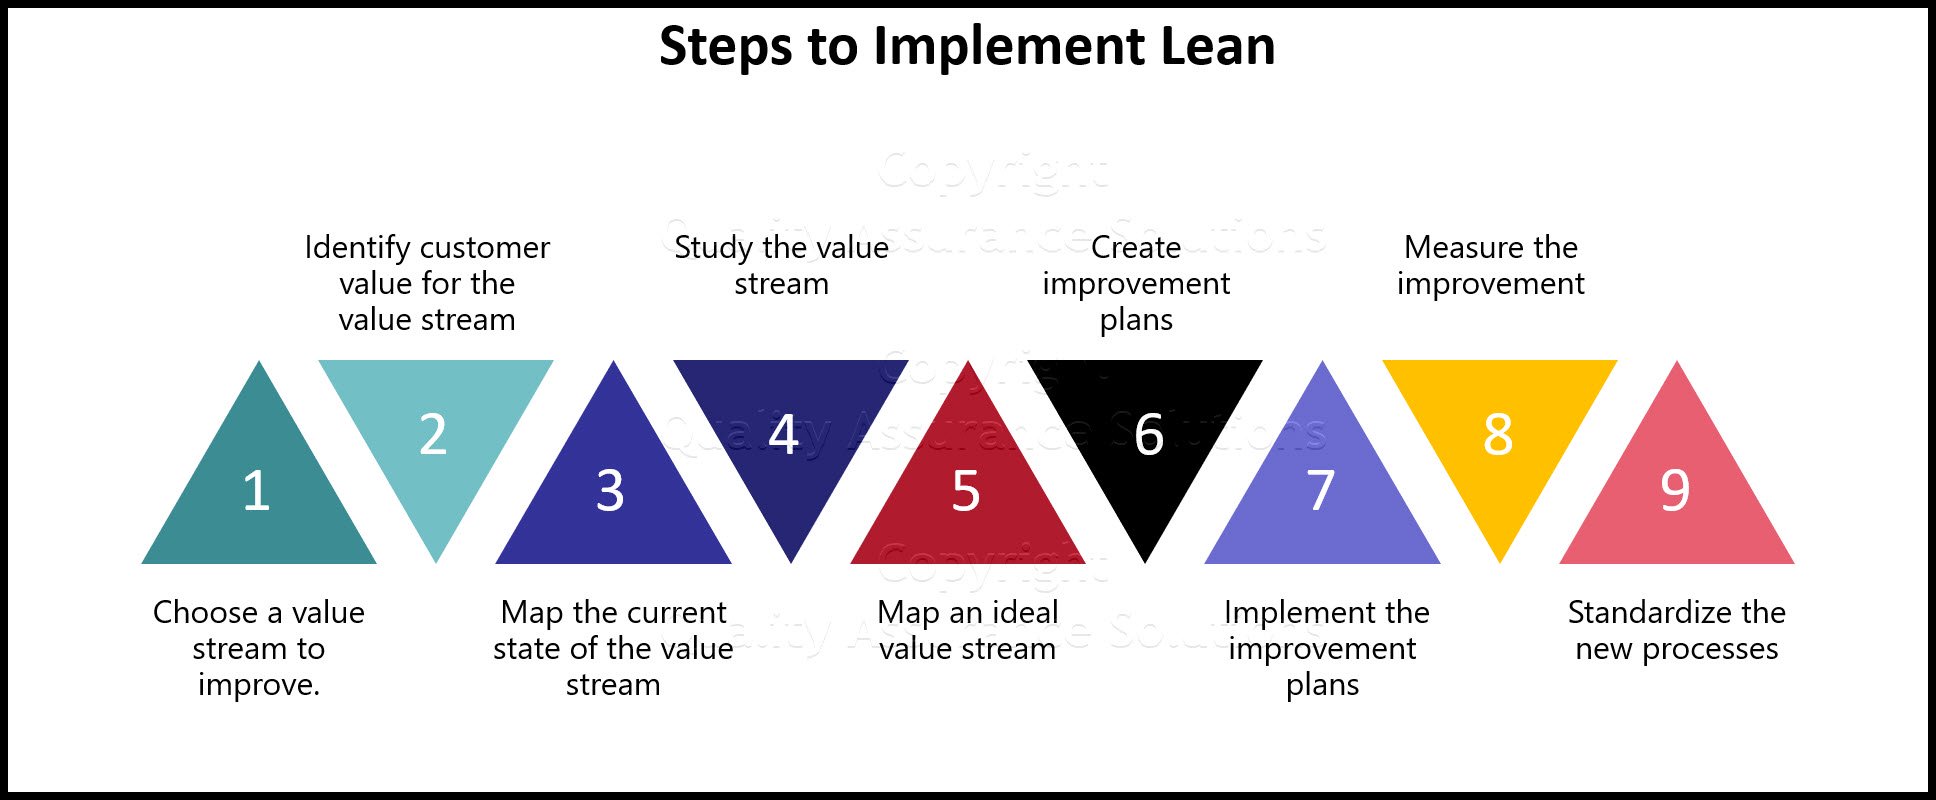 Become a friend with lean thinking. Learn the steps to implement the lean process.